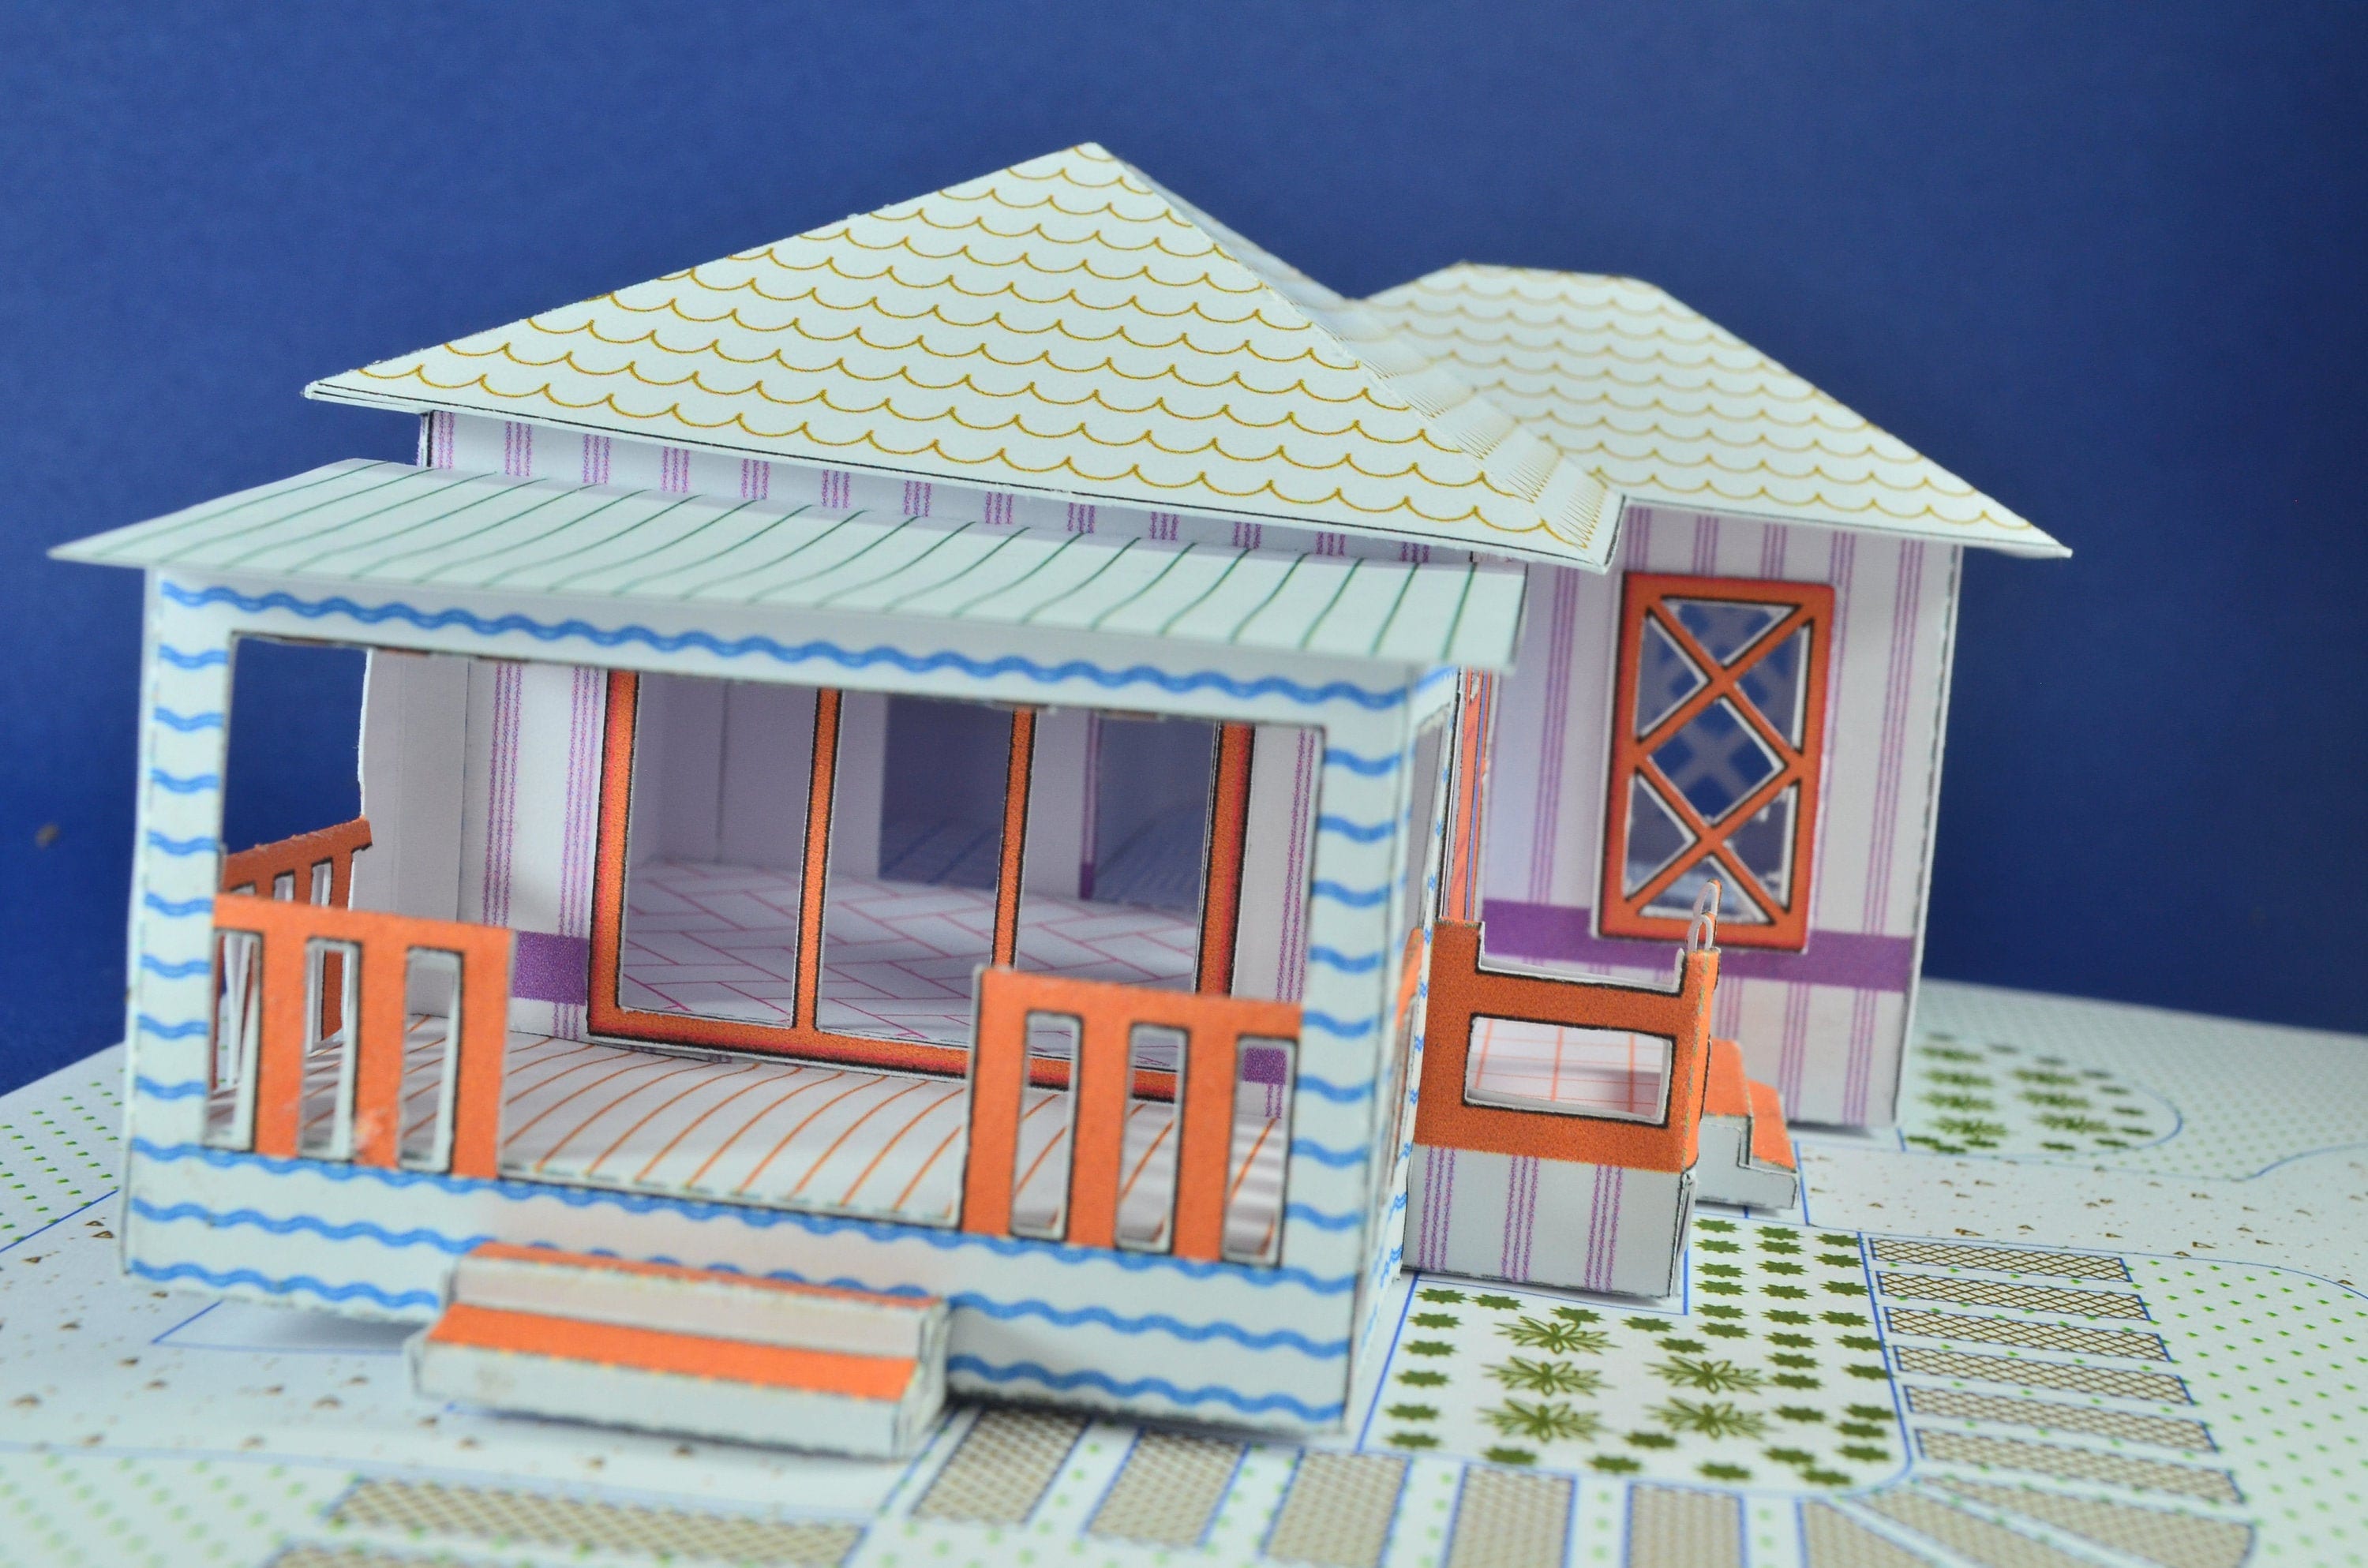 template-creator-20501-single-house-3d-paper-house-doll-etsy